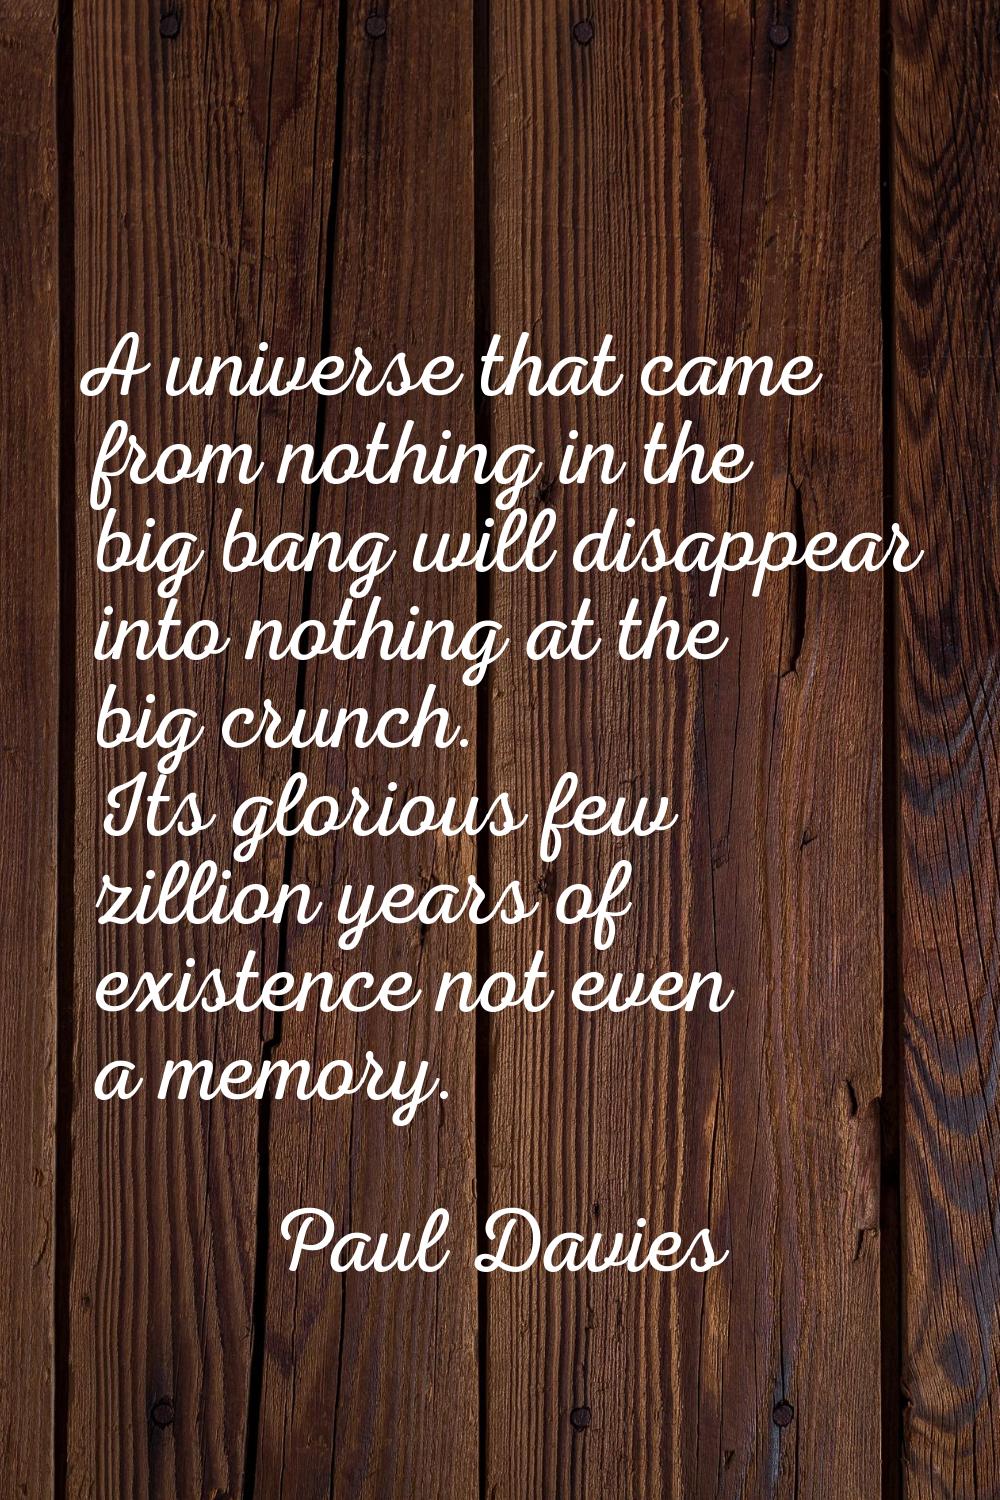 A universe that came from nothing in the big bang will disappear into nothing at the big crunch. It